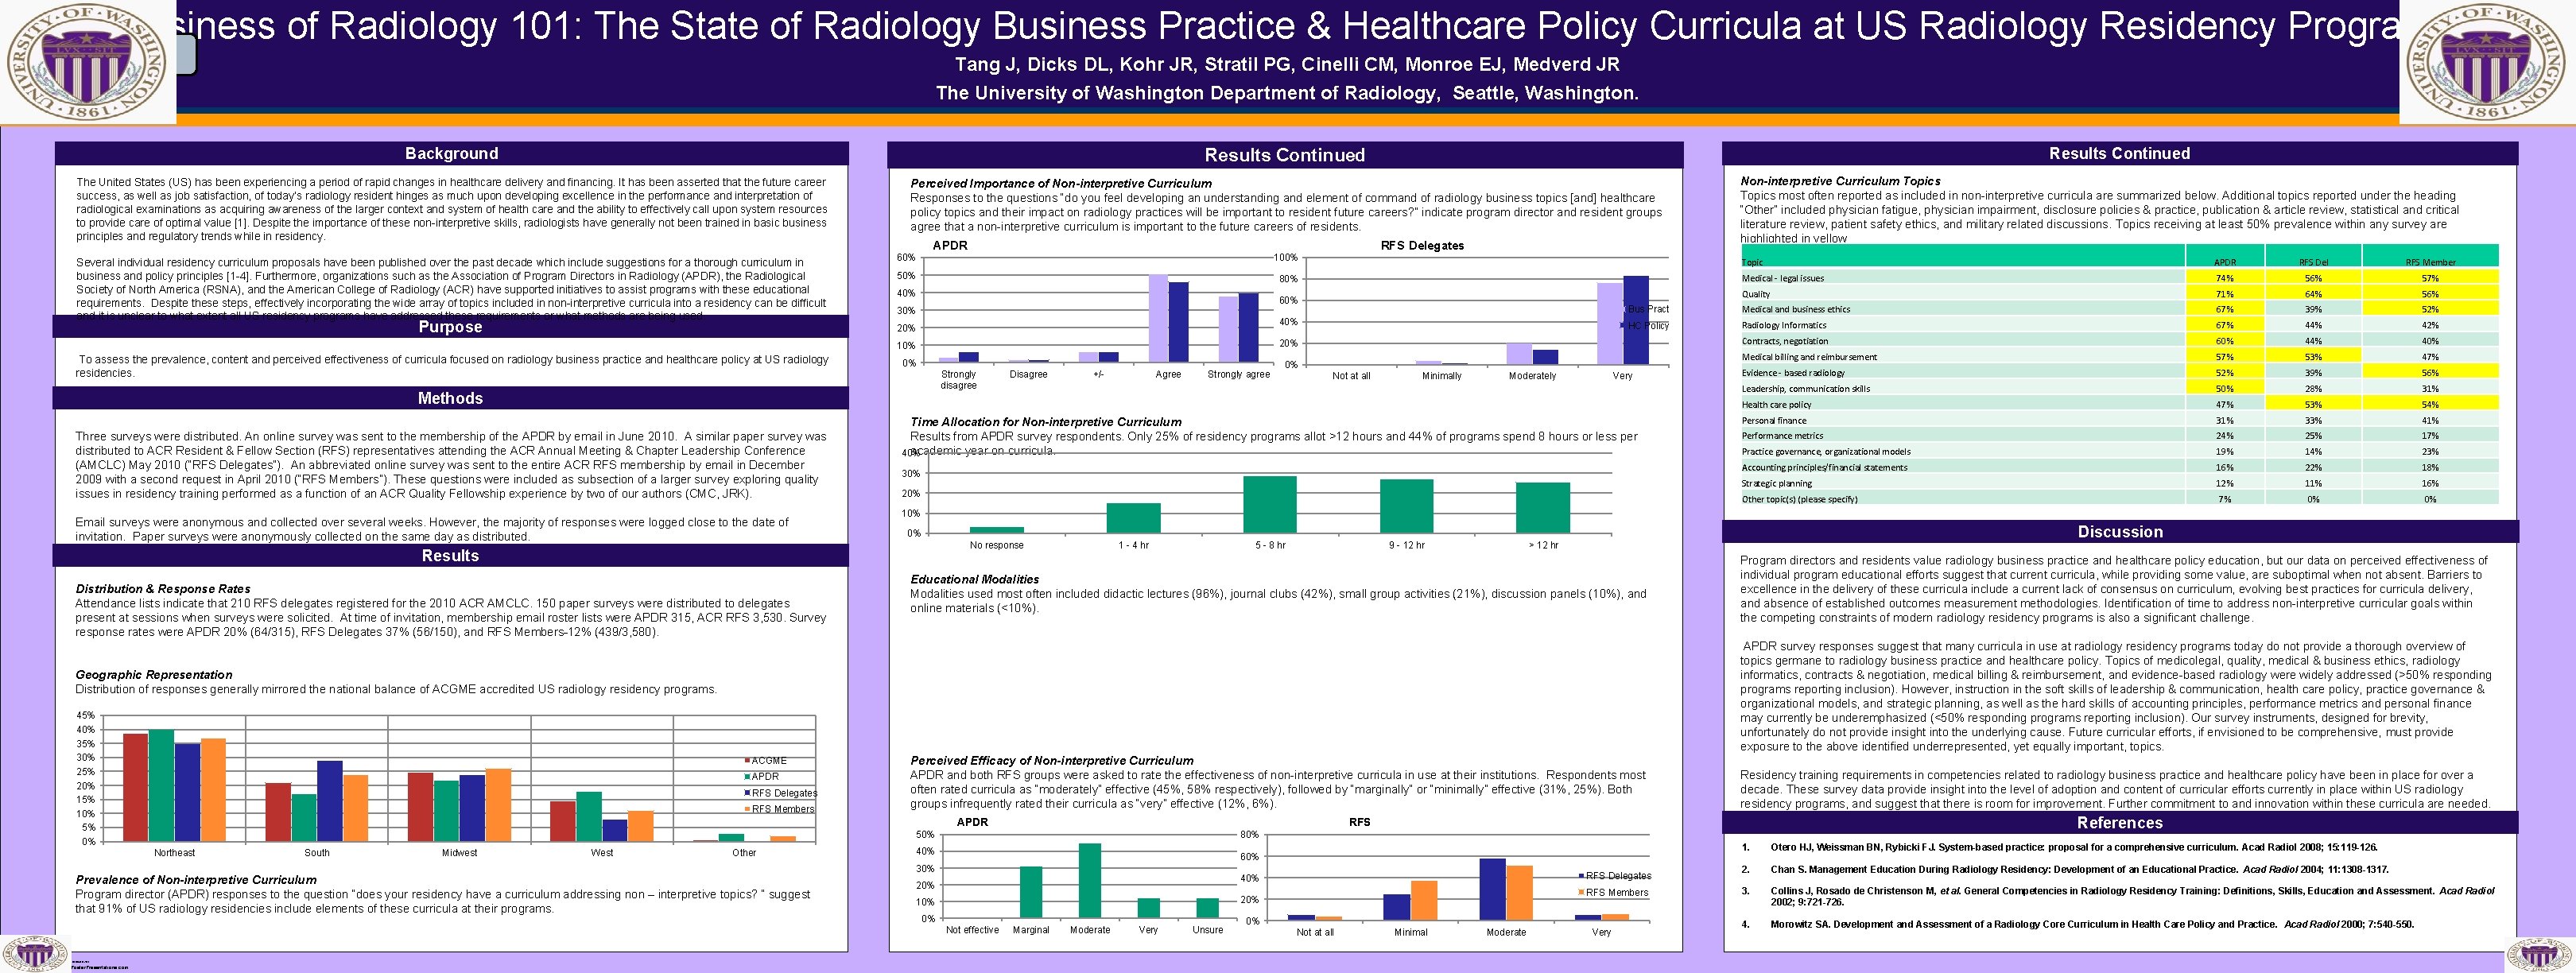 Business of Radiology 101: The State of Radiology Business Practice & Healthcare Policy Curricula